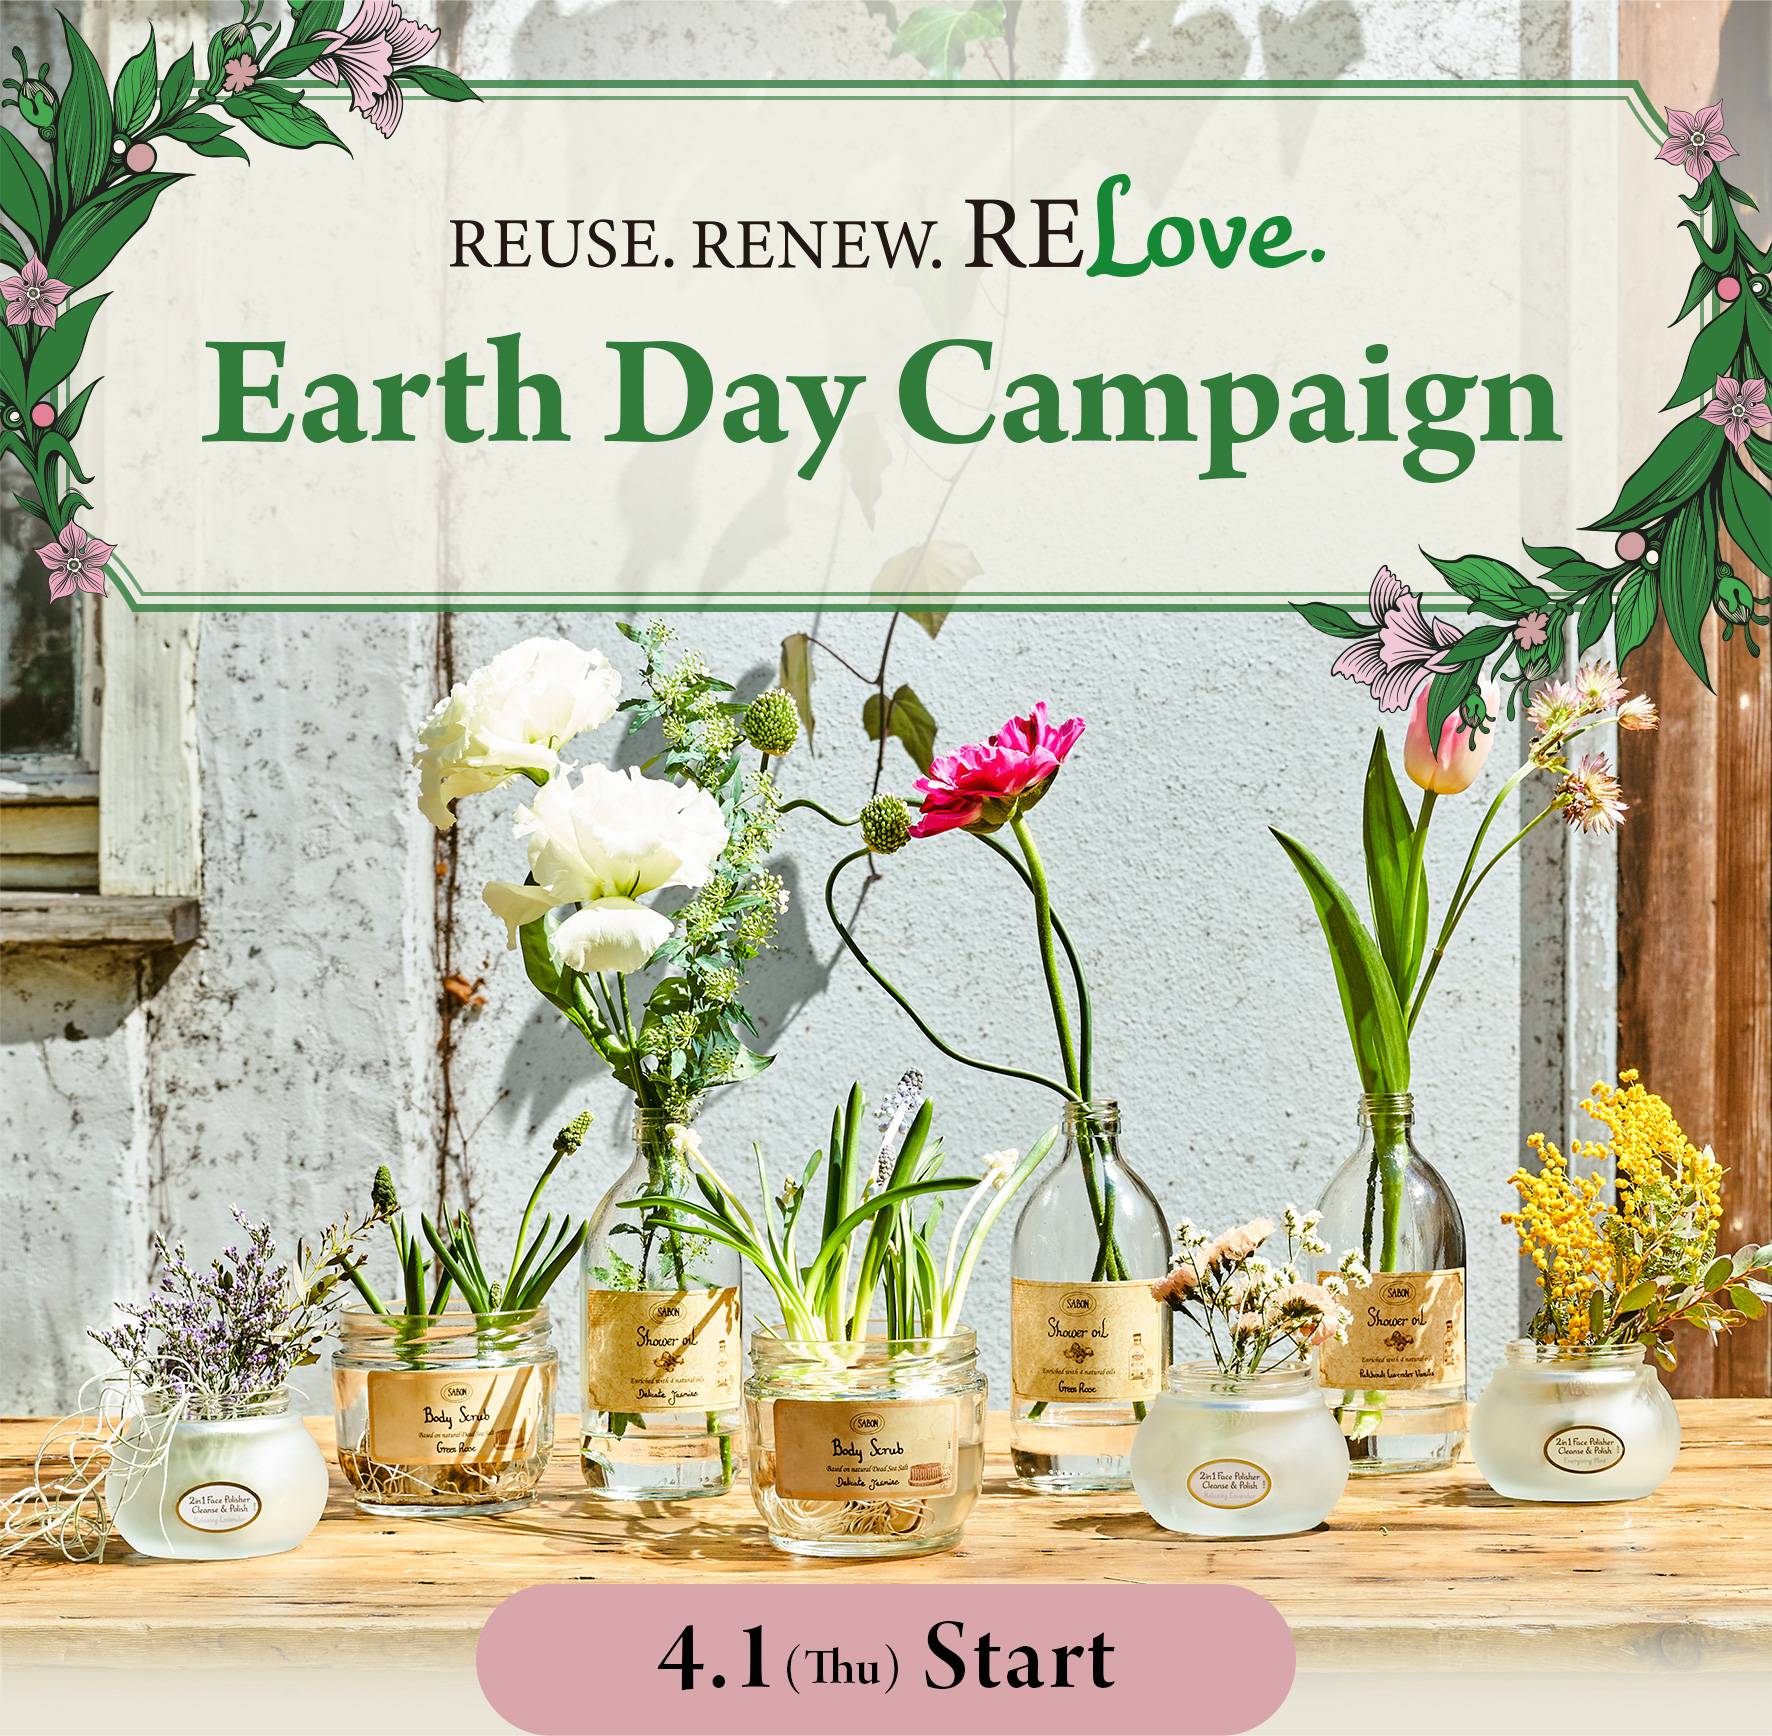 REUSE.RENEW.RELOVE Earth Day Campaign アースデーキャンペーン 4.1(Thu) Start